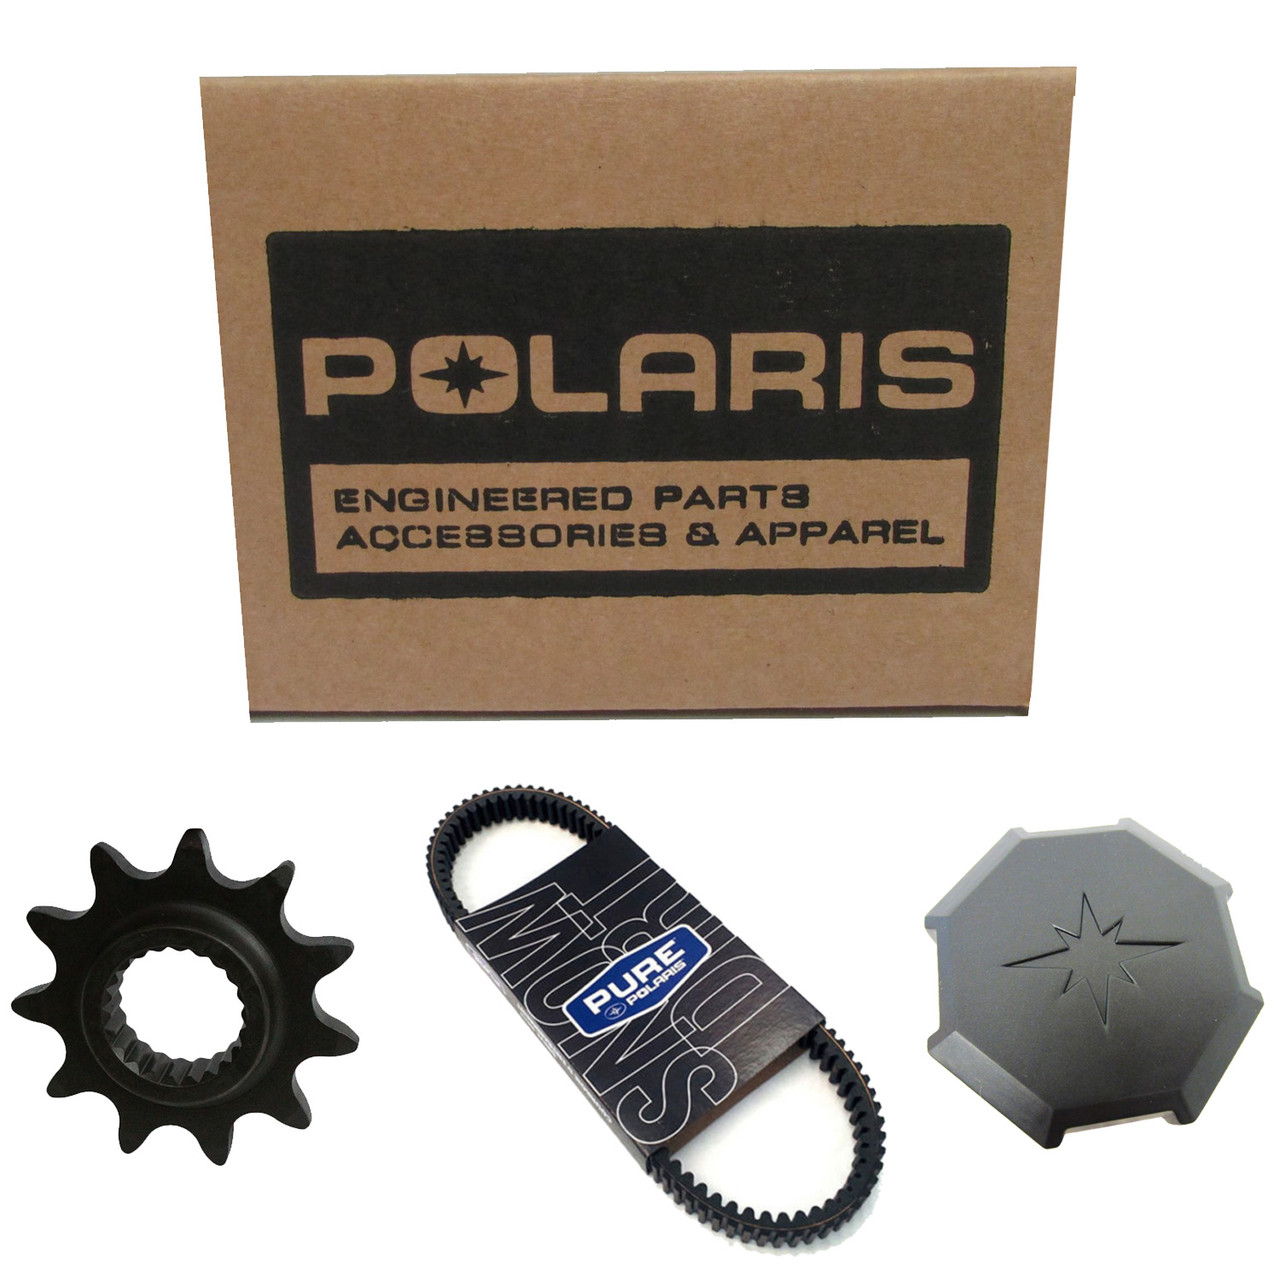 Polaris New OEM Cover-Ignition/Coil,Cast,Right Hand,J Bk, 5632603-626